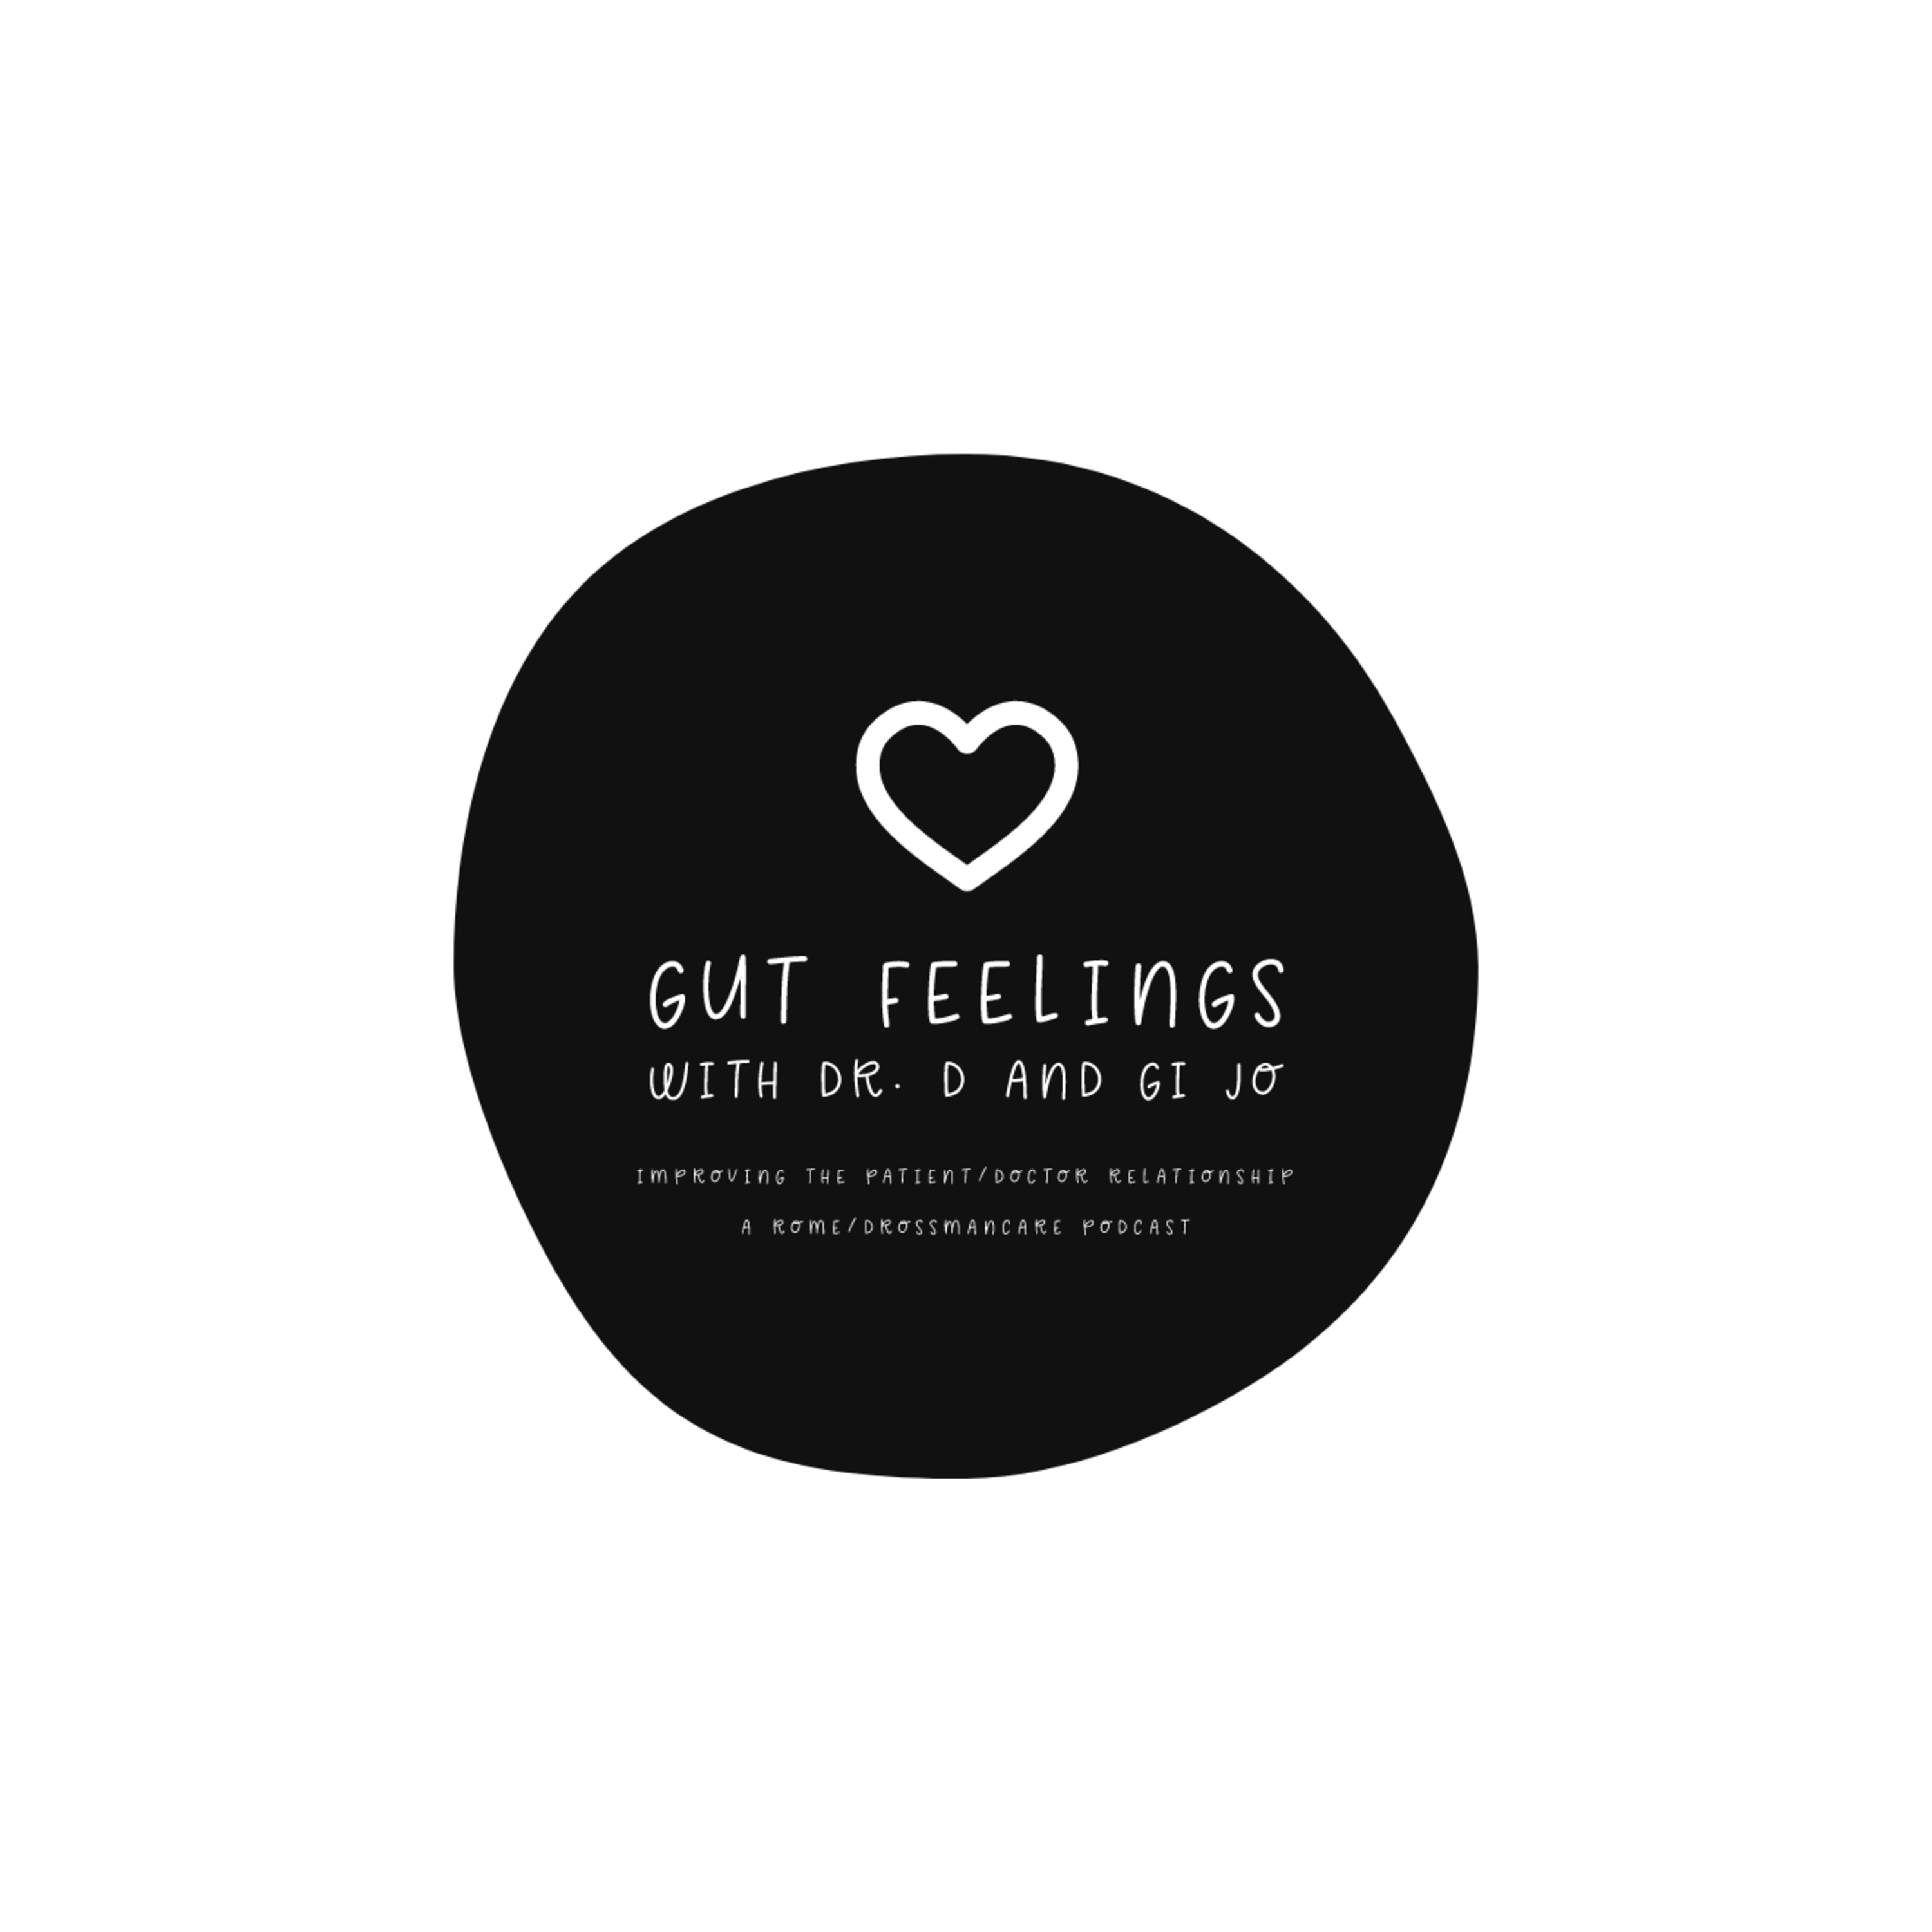 Artwork for podcast Gut Feelings: With Dr. D and GI Jo: A Rome Foundation/DrossmanCare Podcast Series